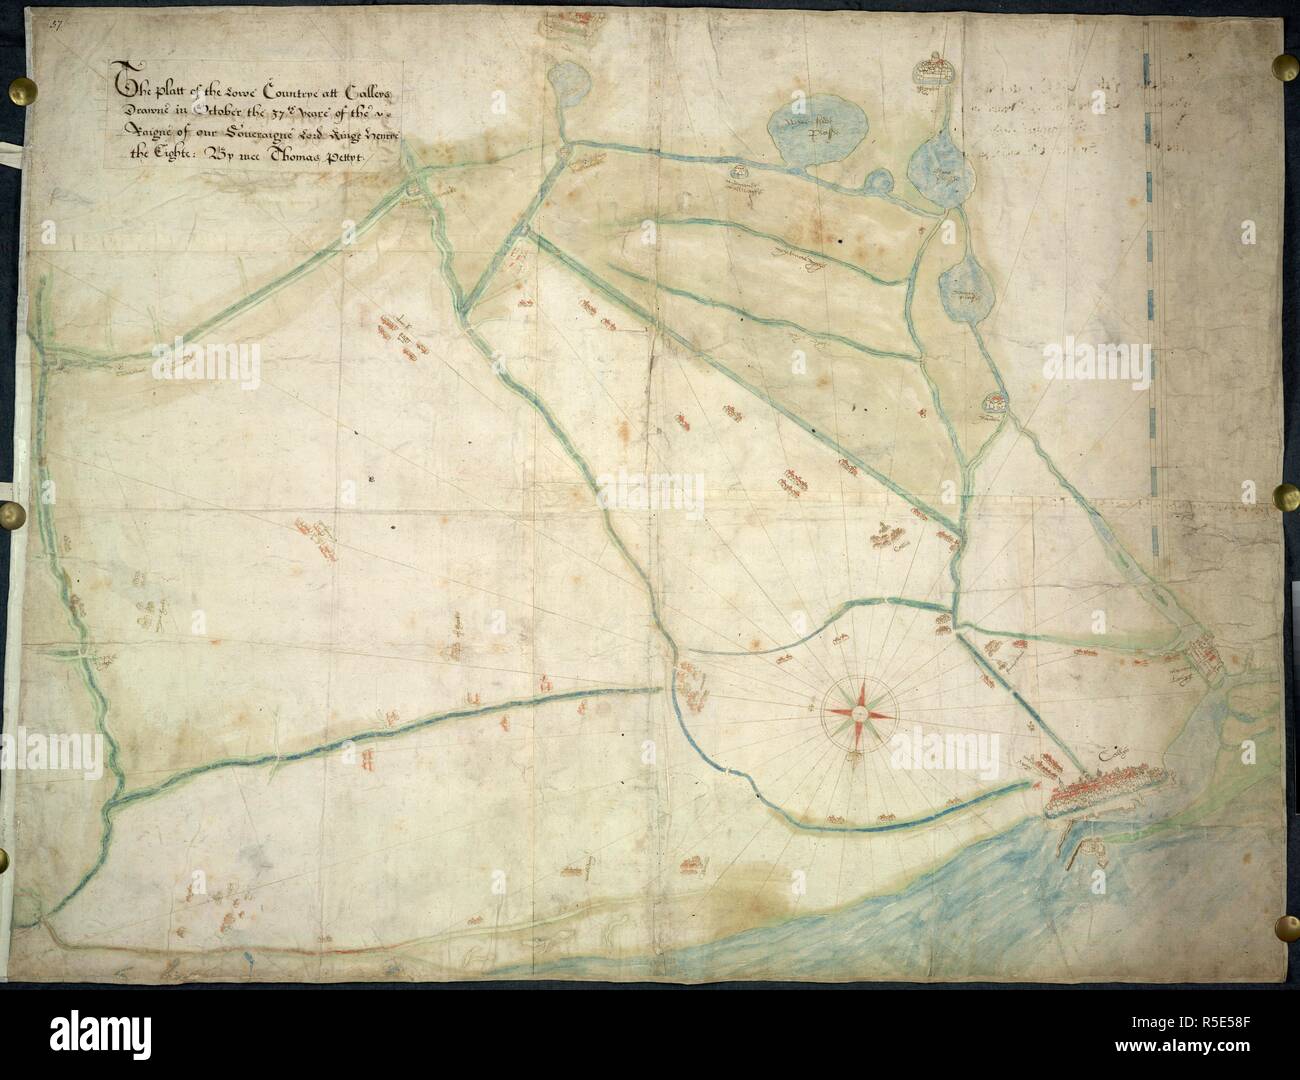 The platt of the Lowe Countrye att Calleys.  This is a map of Calais, France and the surrounding area from the sea. It was drawn in October 1545 by Thomas Petit. The platt of the Lowe Countrye att Calleys. 1545. Medium: Ink and tempera on parchment. Source: Cotton Augustus I.ii.57.B. Stock Photo